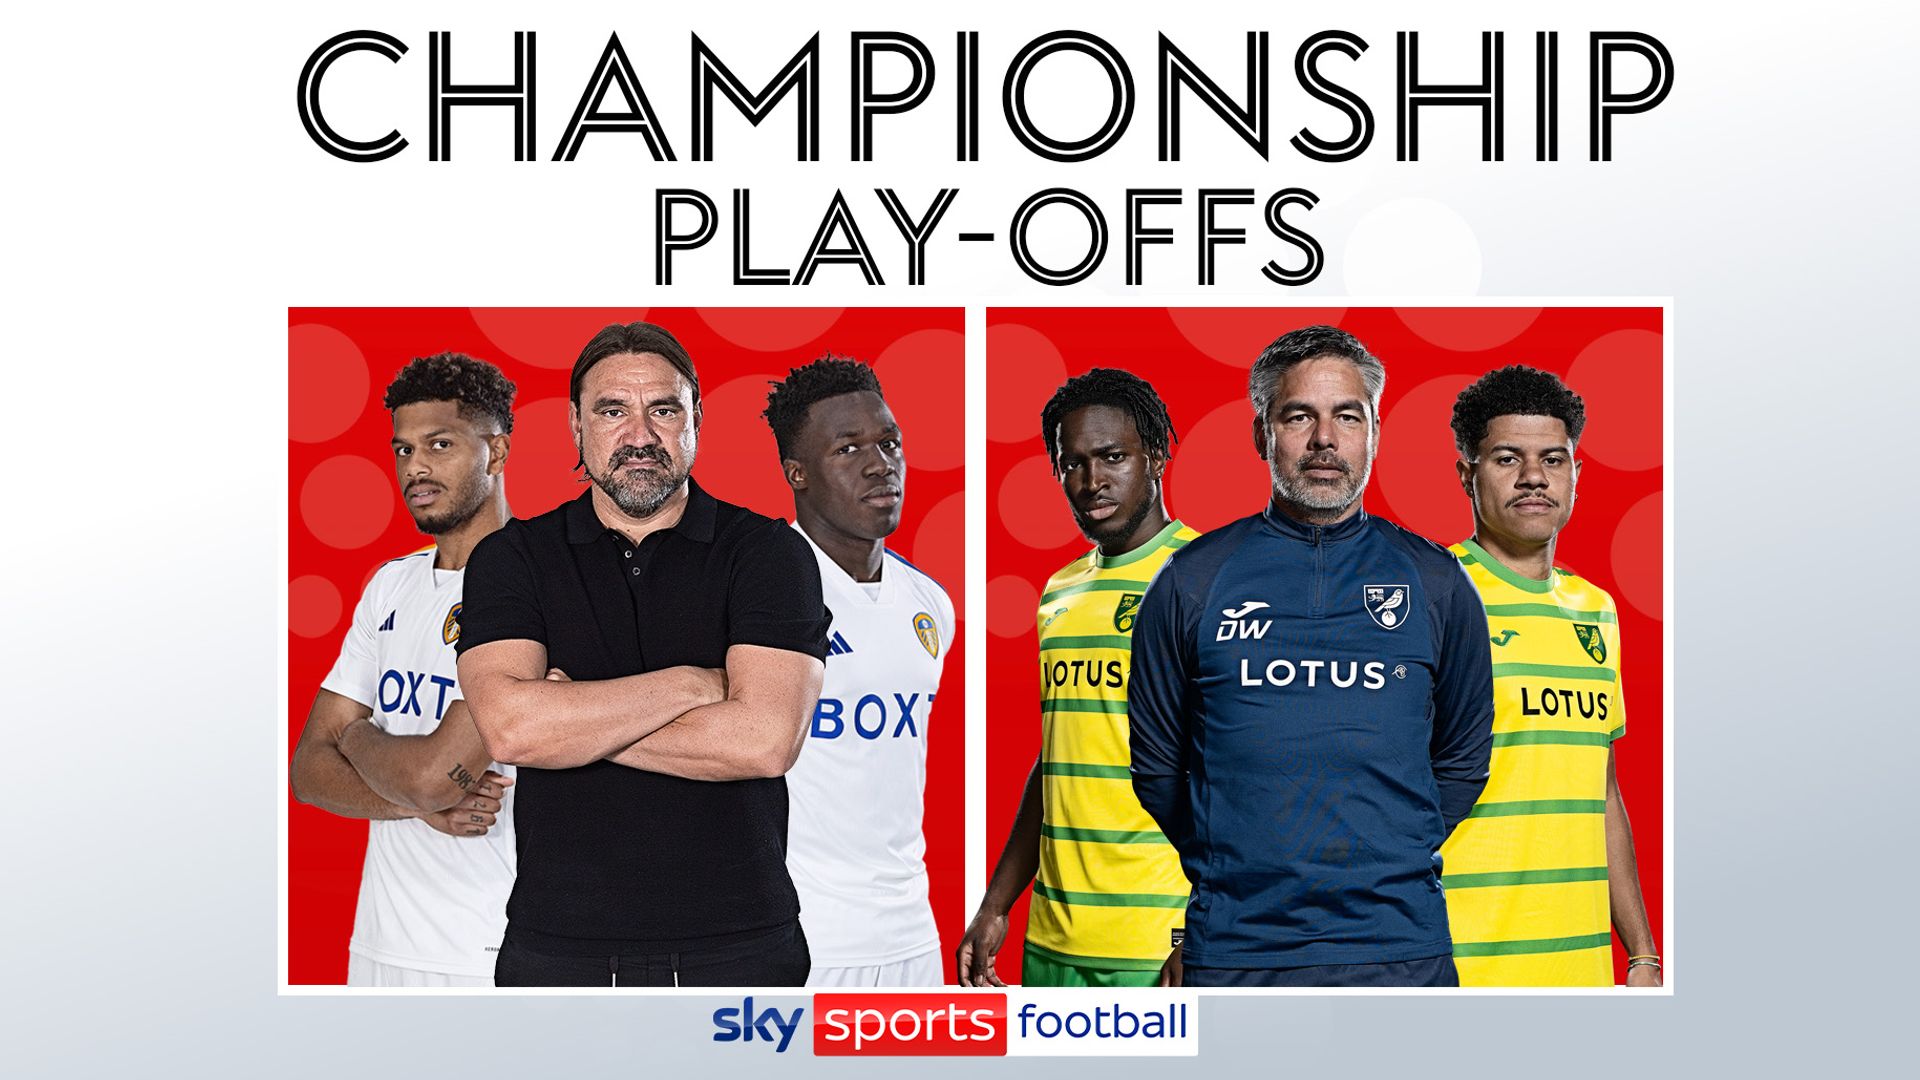 Leeds vs Norwich: Who will prevail in Championship play-off showdown?